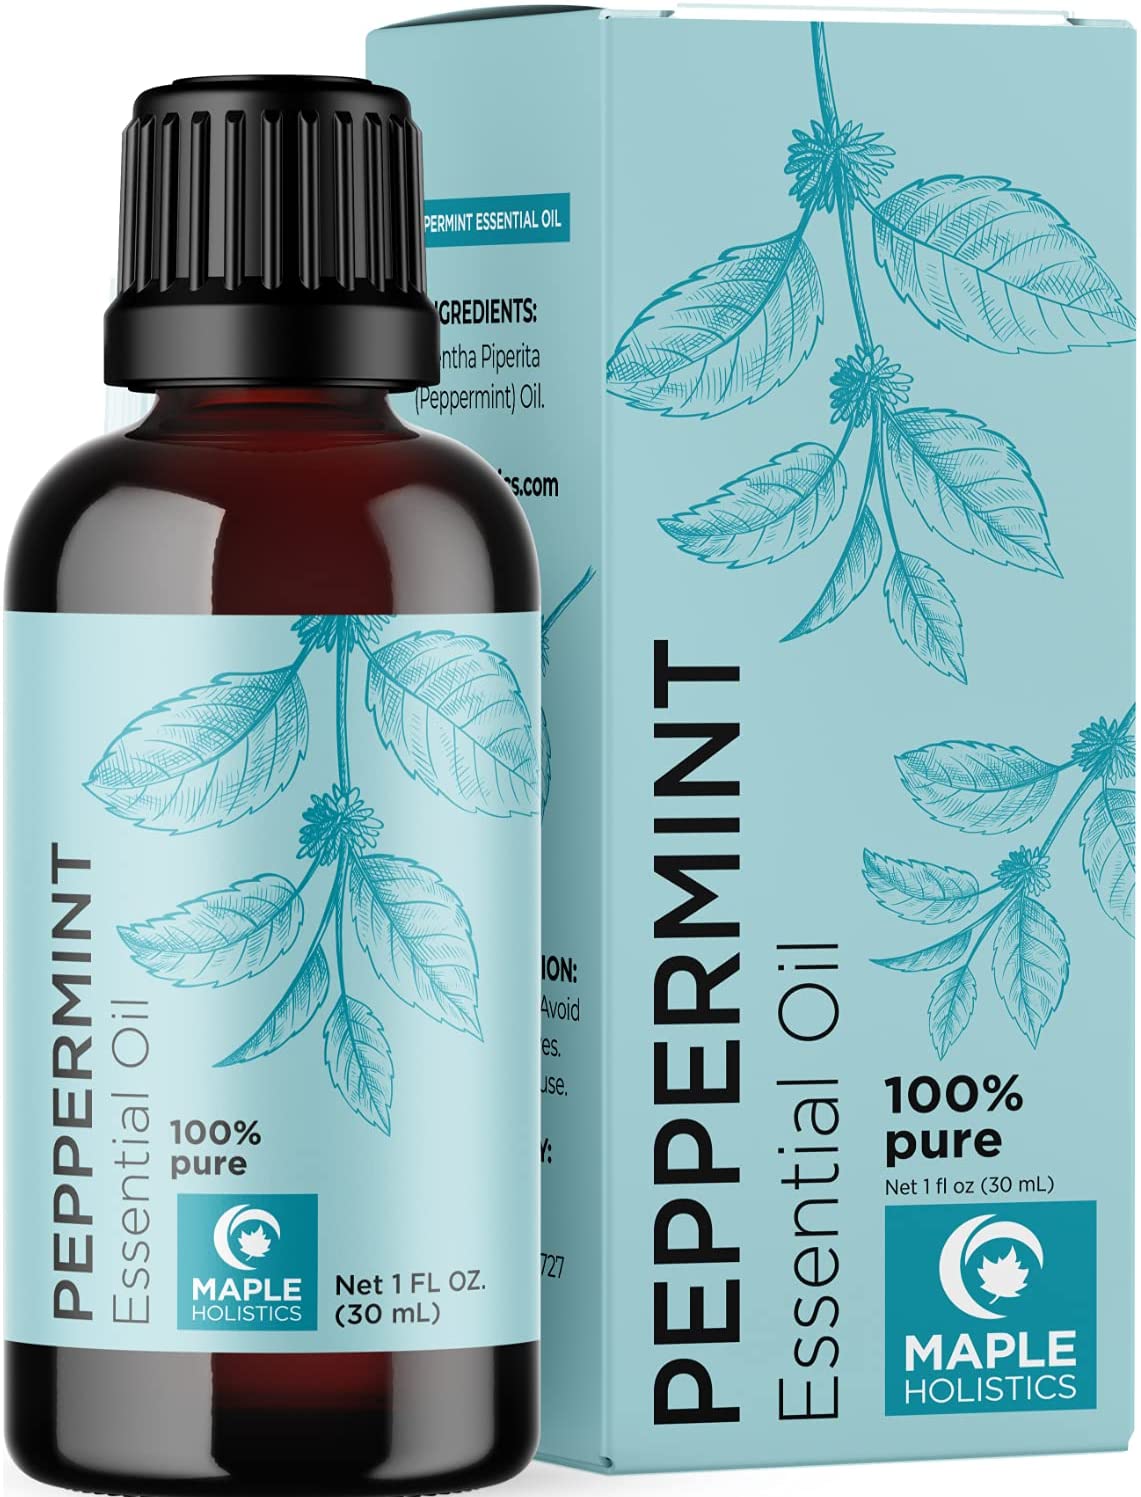 100% Pure Peppermint Oil Undiluted by Maple Holistics